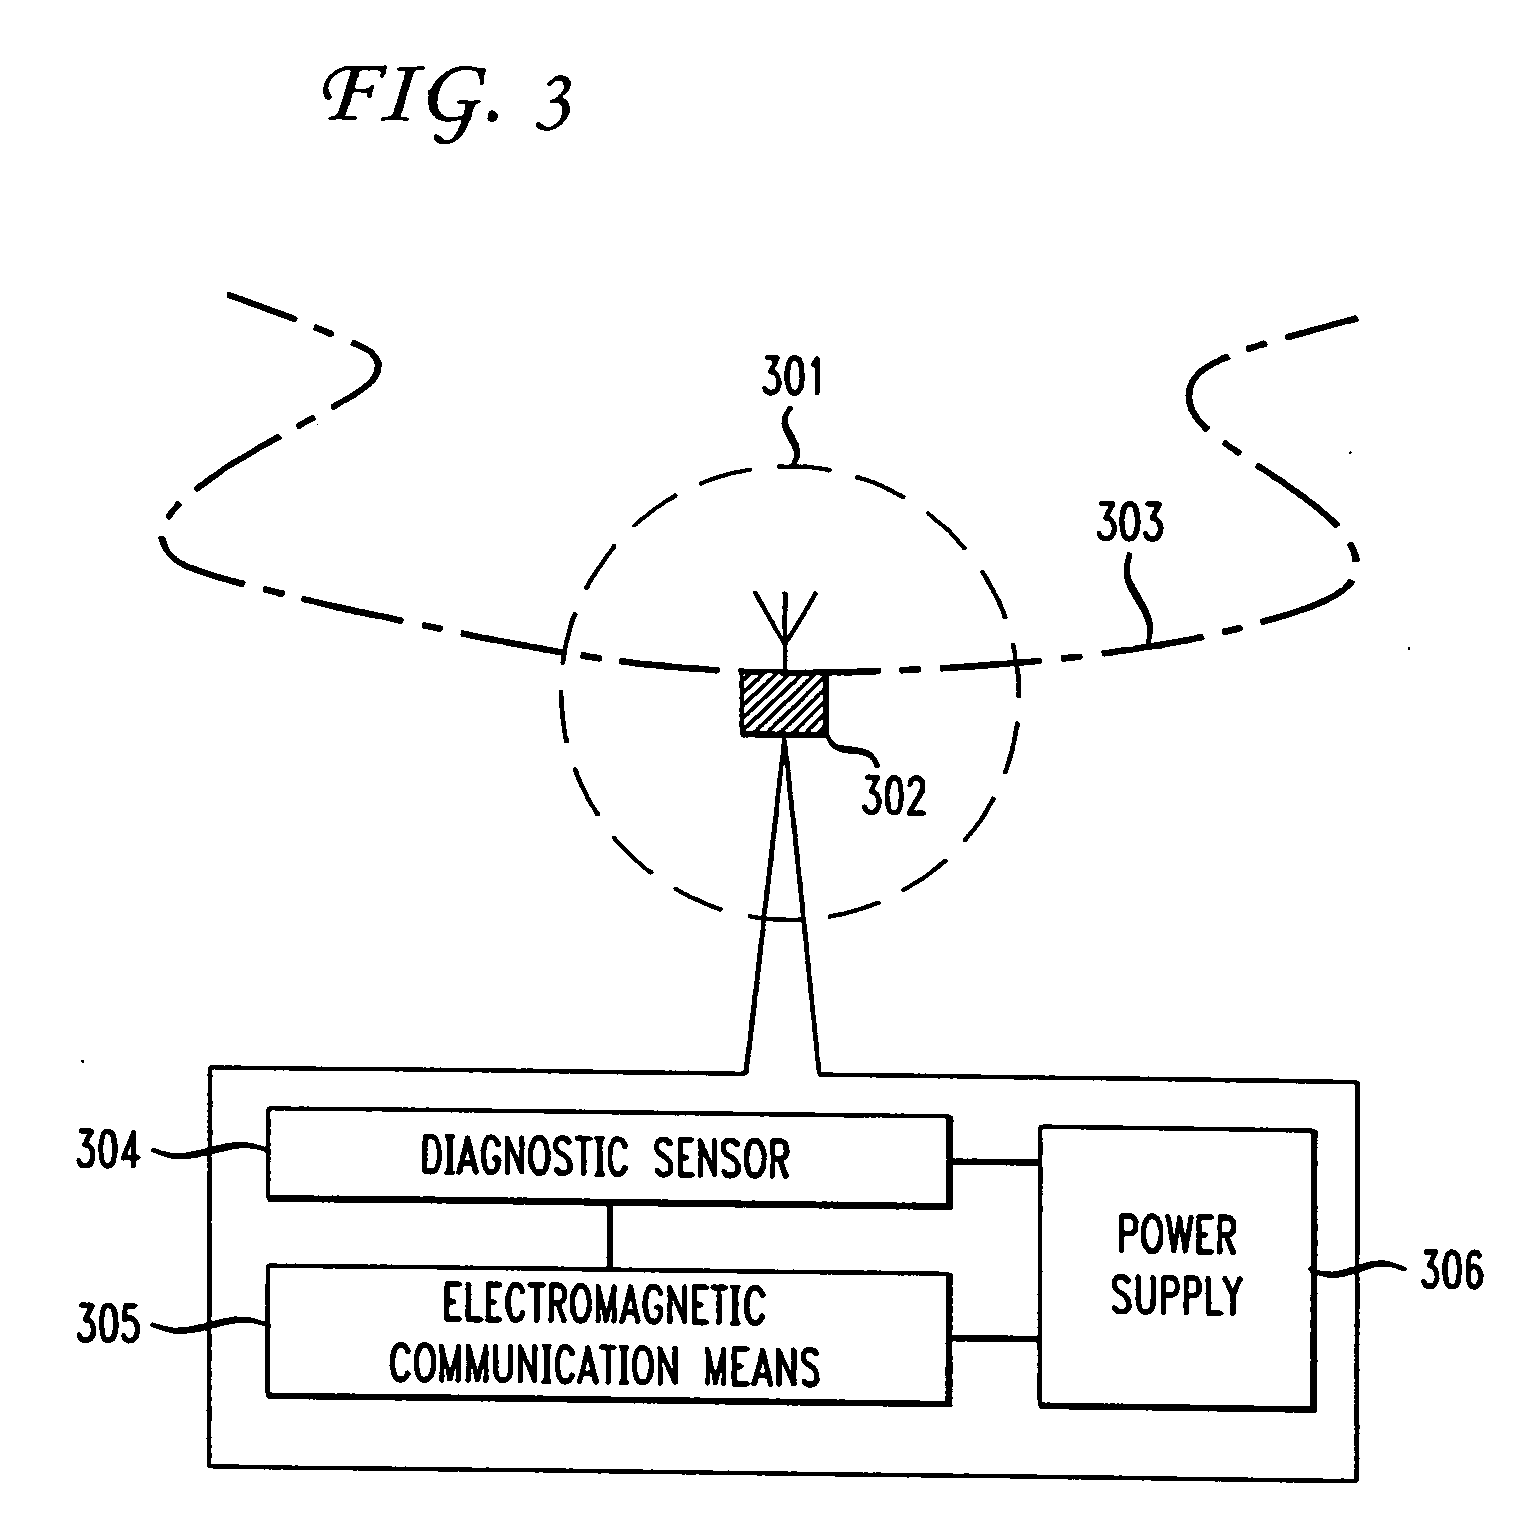 Method and apparatus for monitoring a material medium